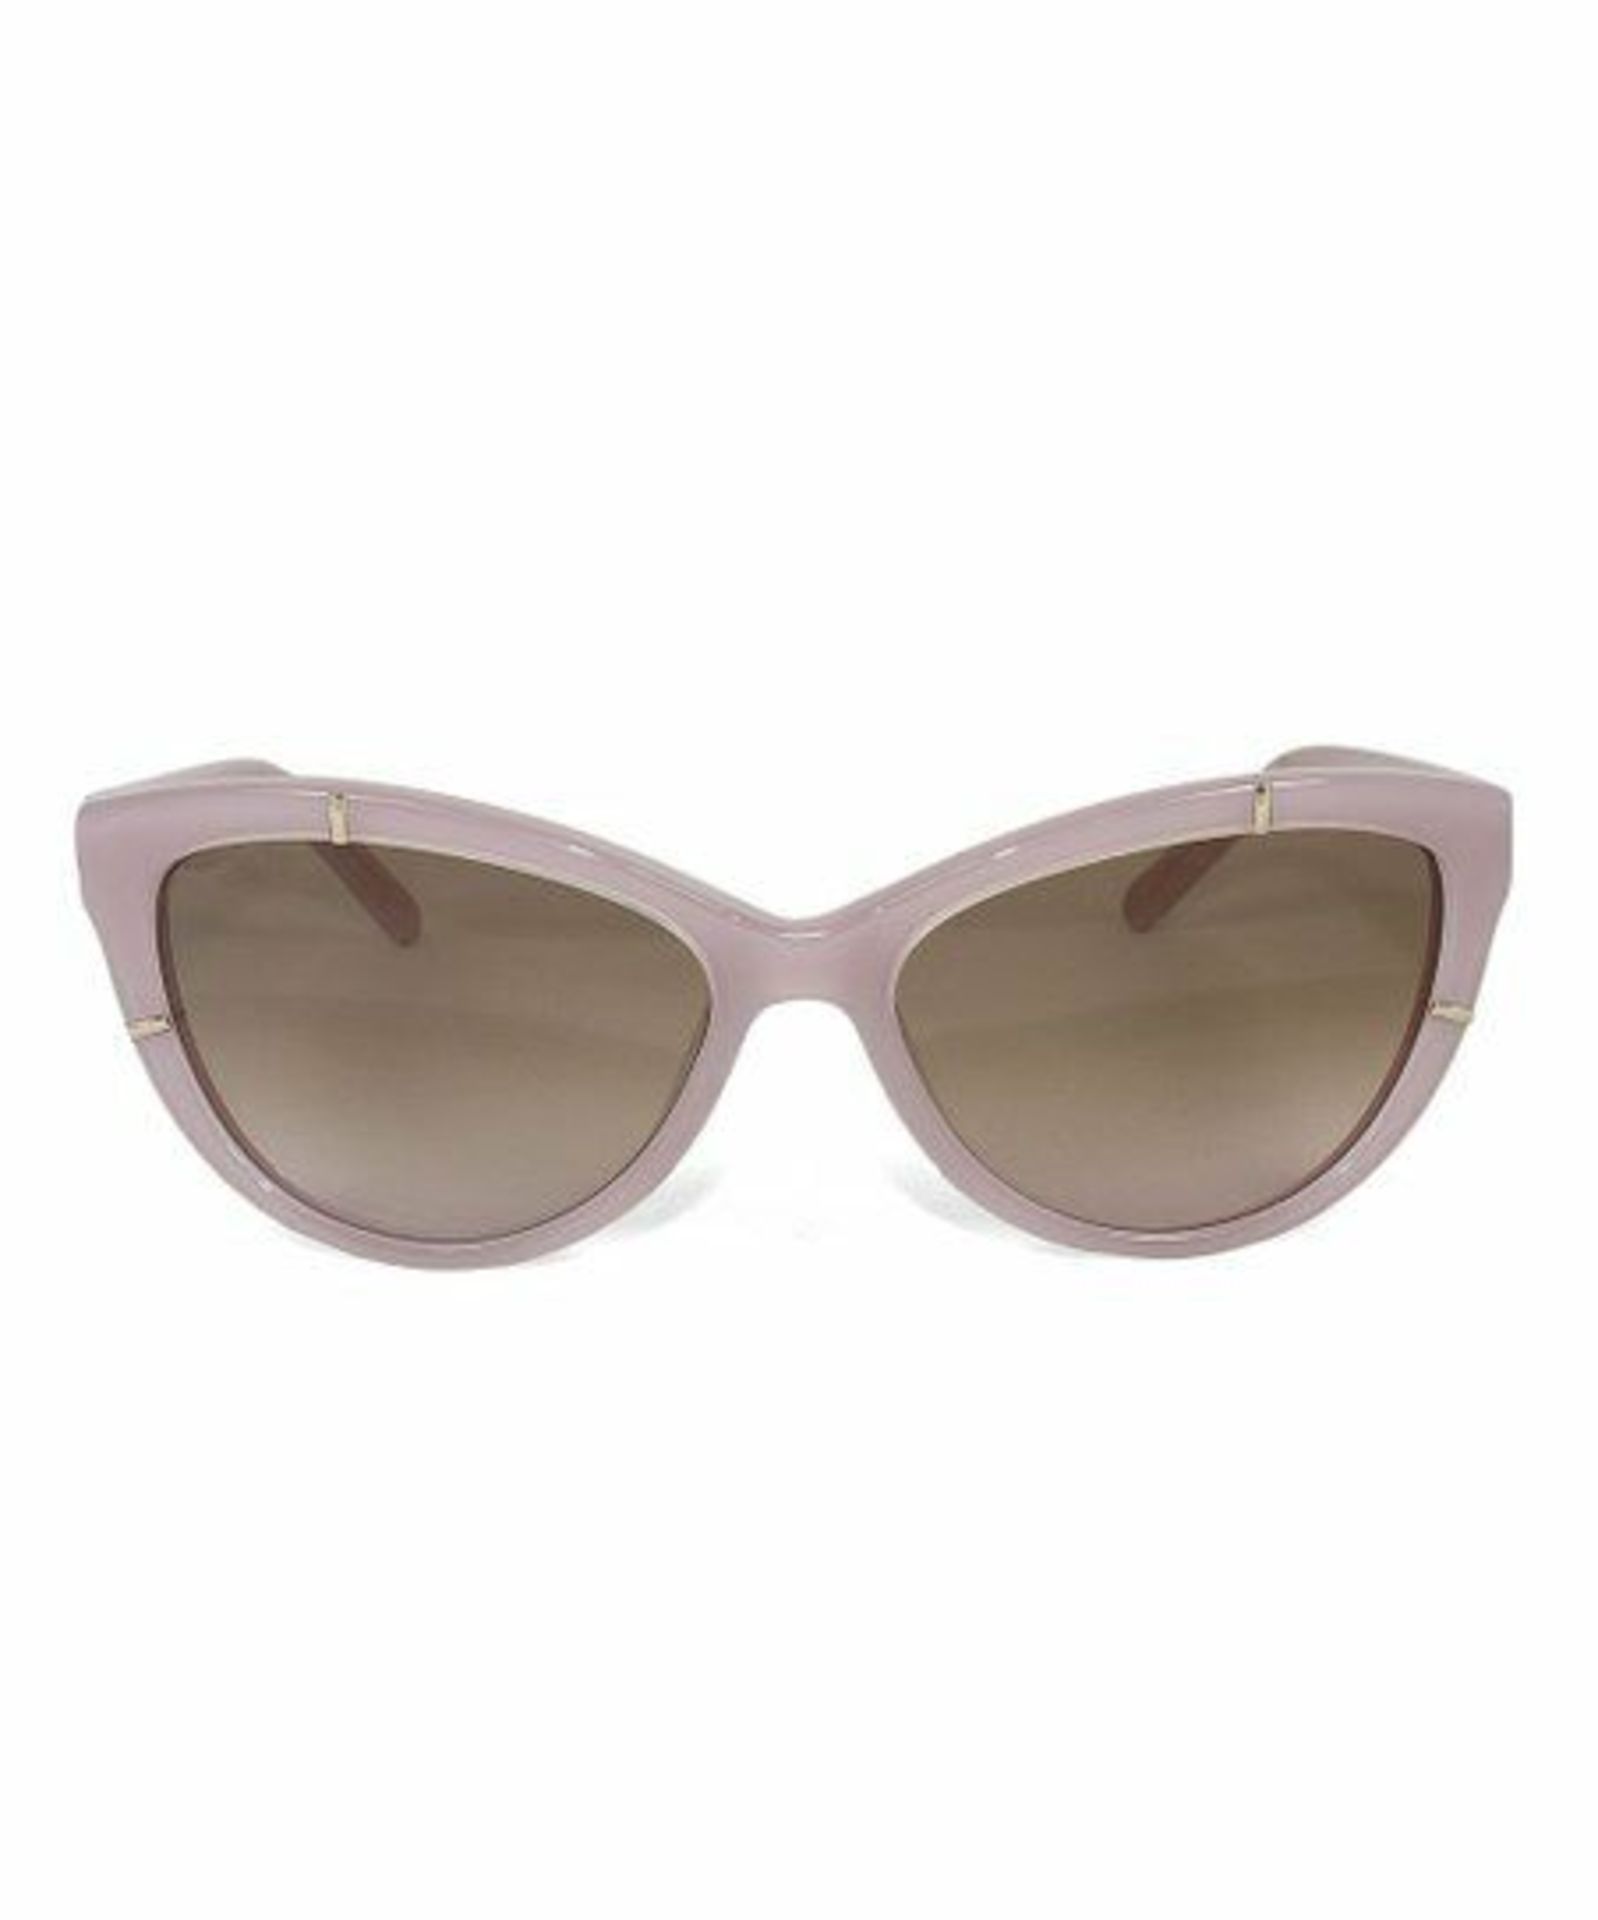 Chloè Pink & Brown Cat-Eye Sunglasses (New With Defects) [Ref: 12696425-Mi-Tub 7-Mi] - Image 2 of 2